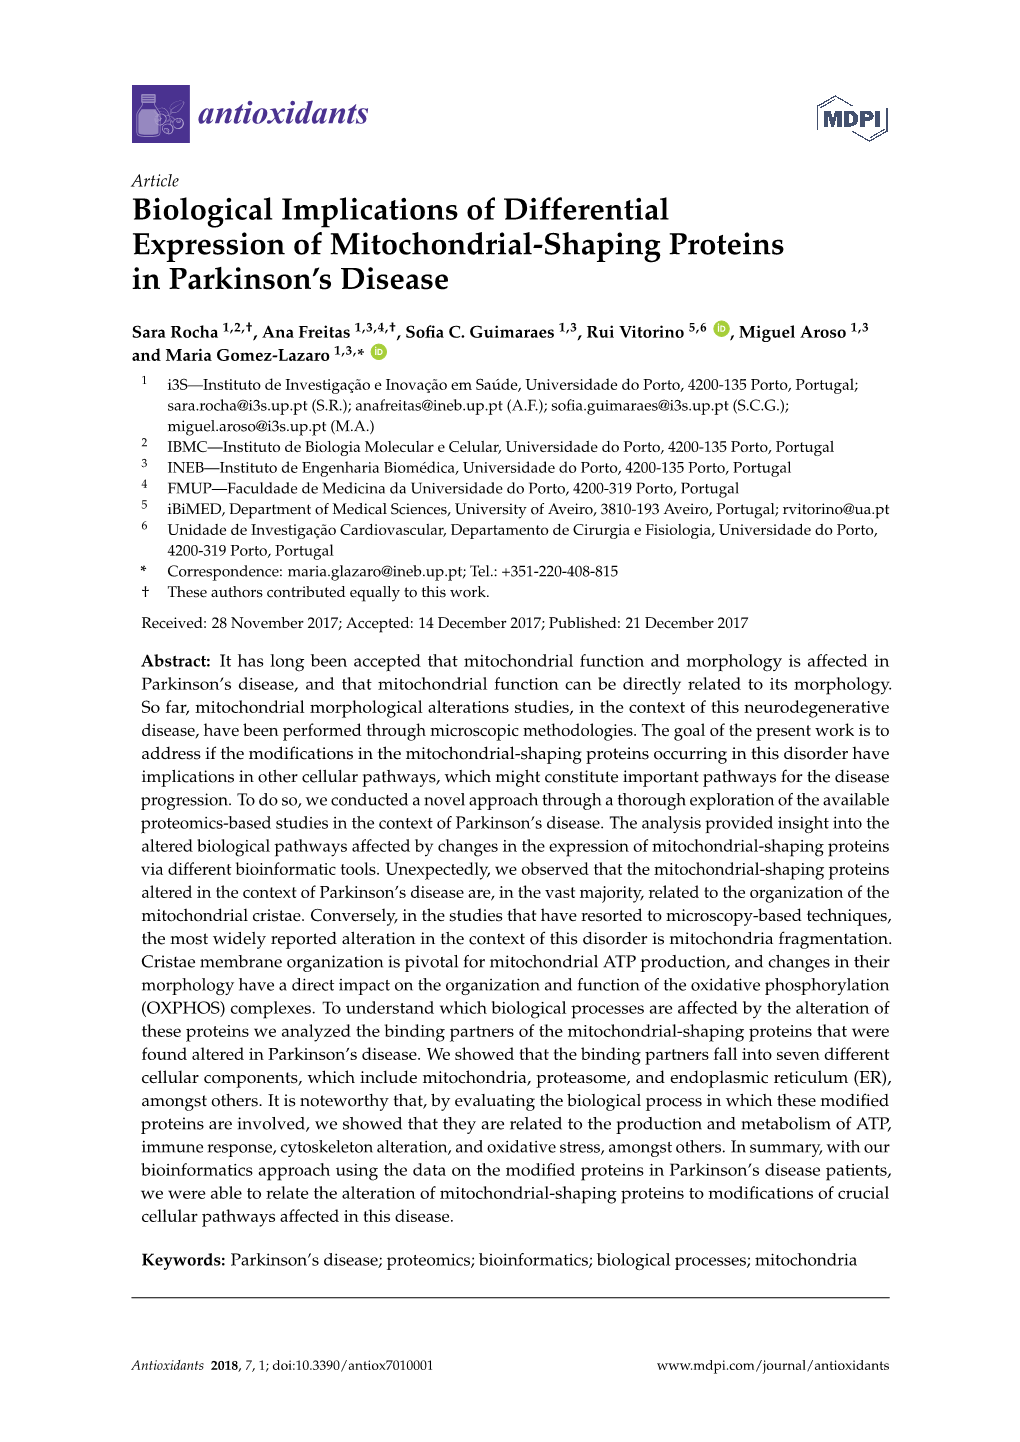 Biological Implications of Differential Expression of Mitochondrial-Shaping Proteins in Parkinson’S Disease